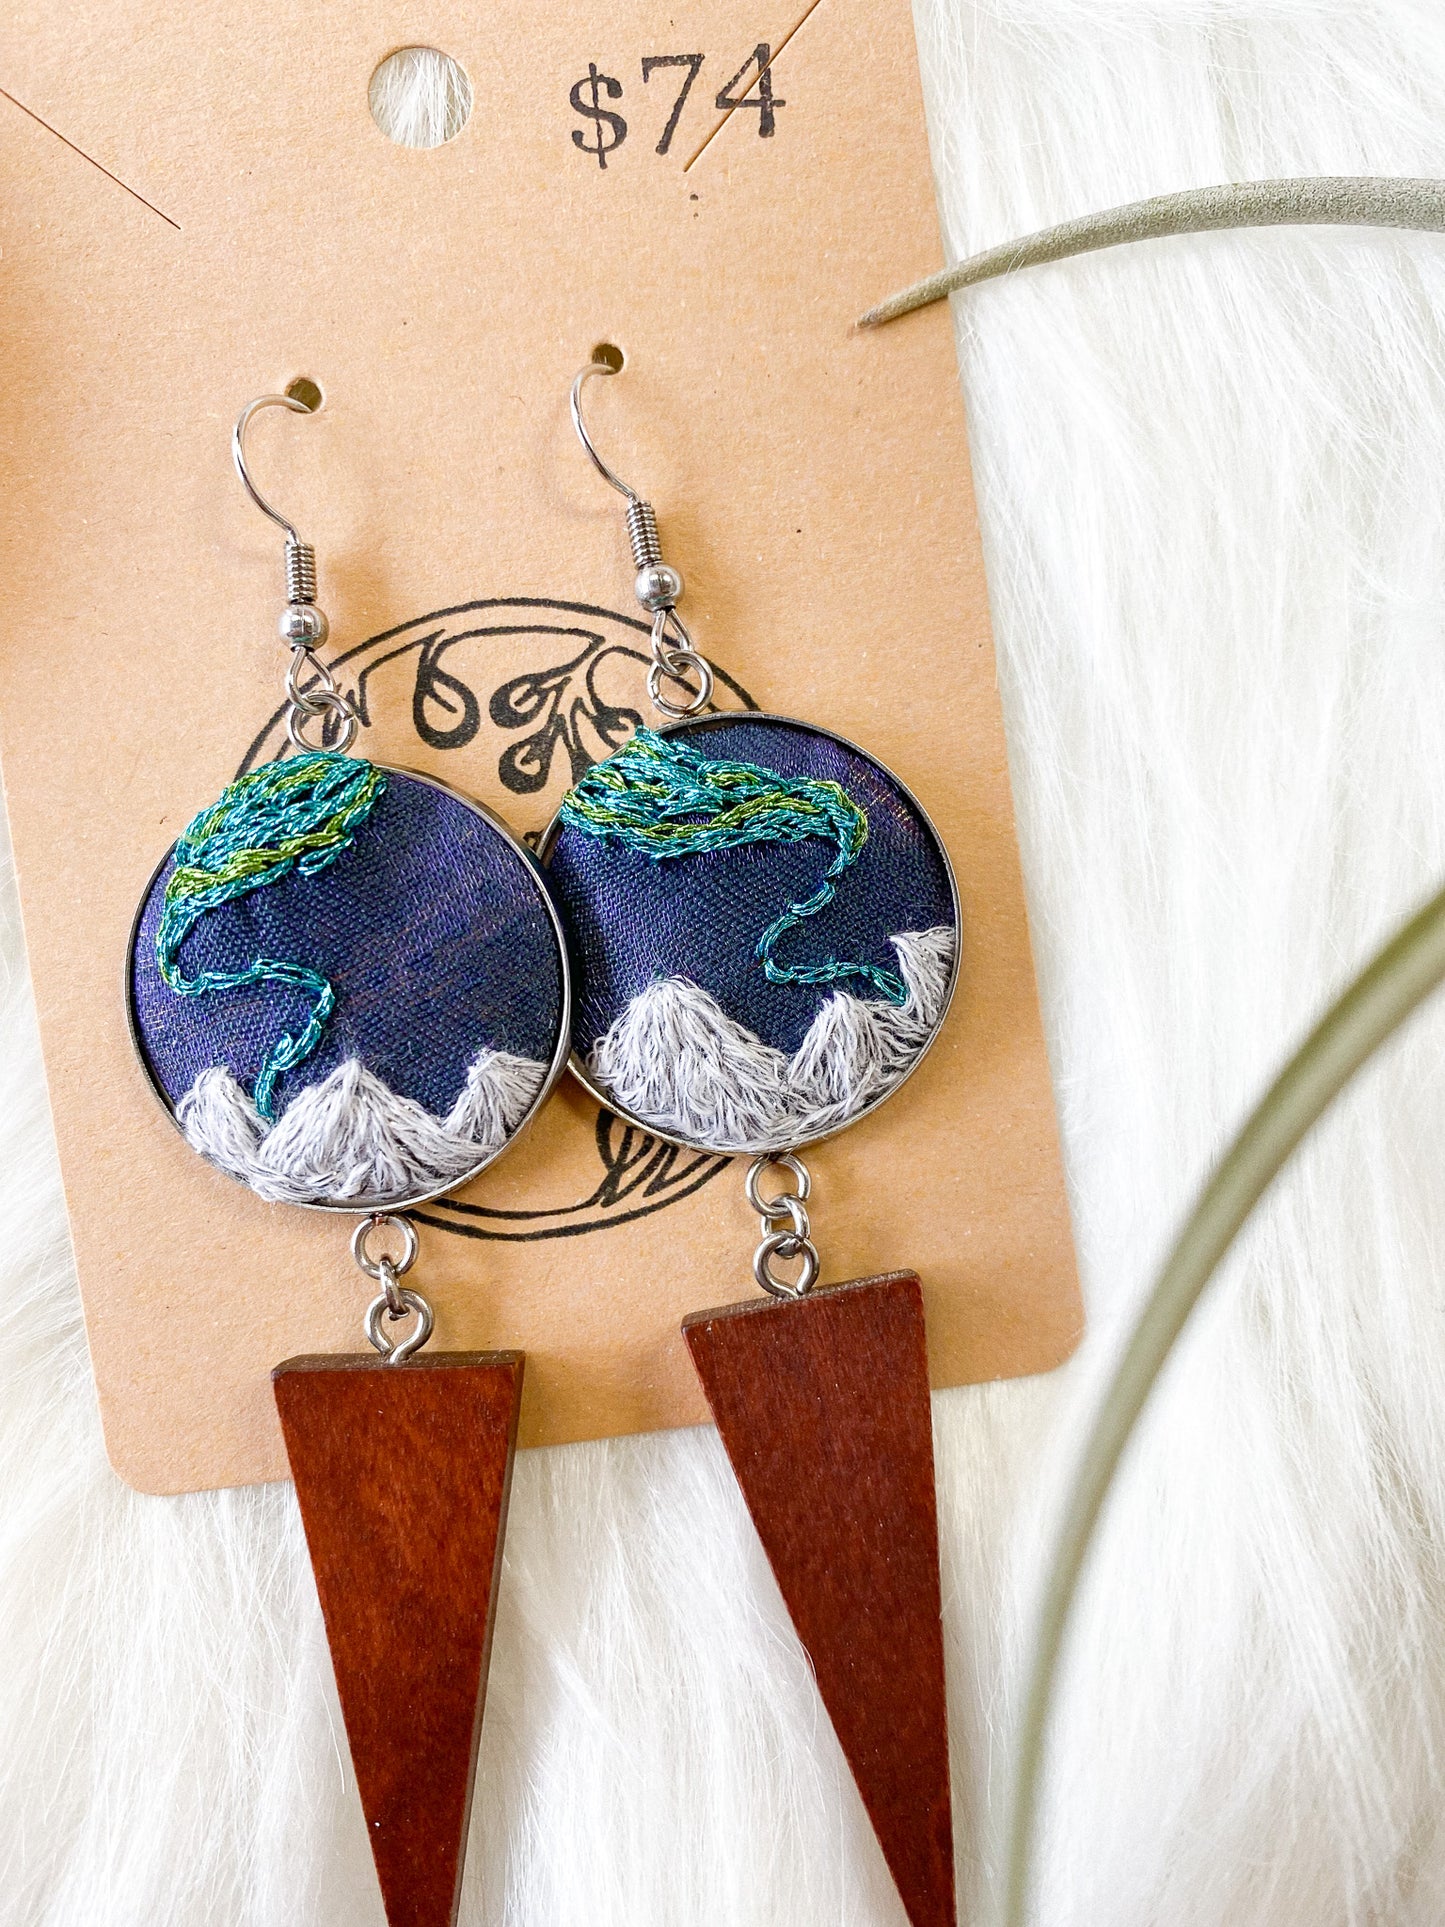 Aurora Over White Mountains Earrings by Brittany Montour